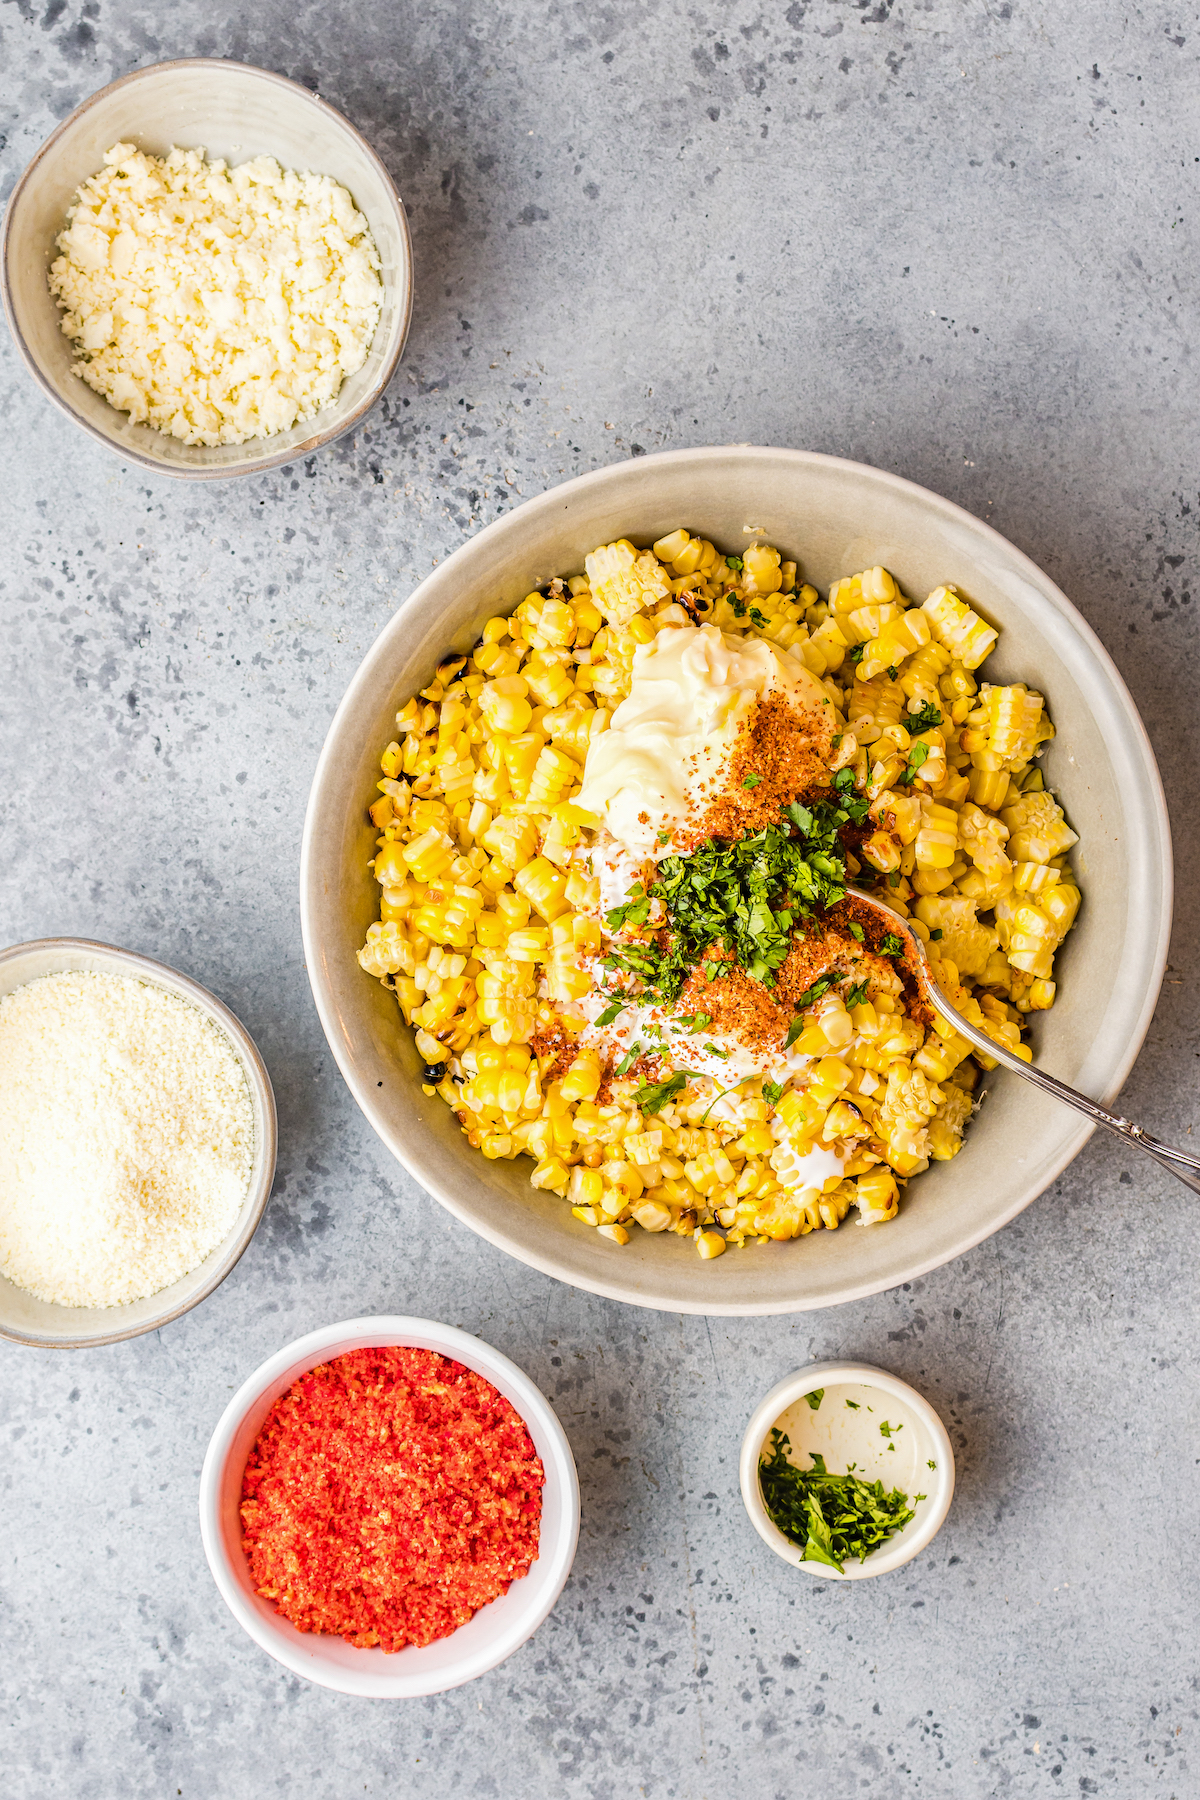 Corn, mayonnaise, tajin, and other ingredients in a bowl.